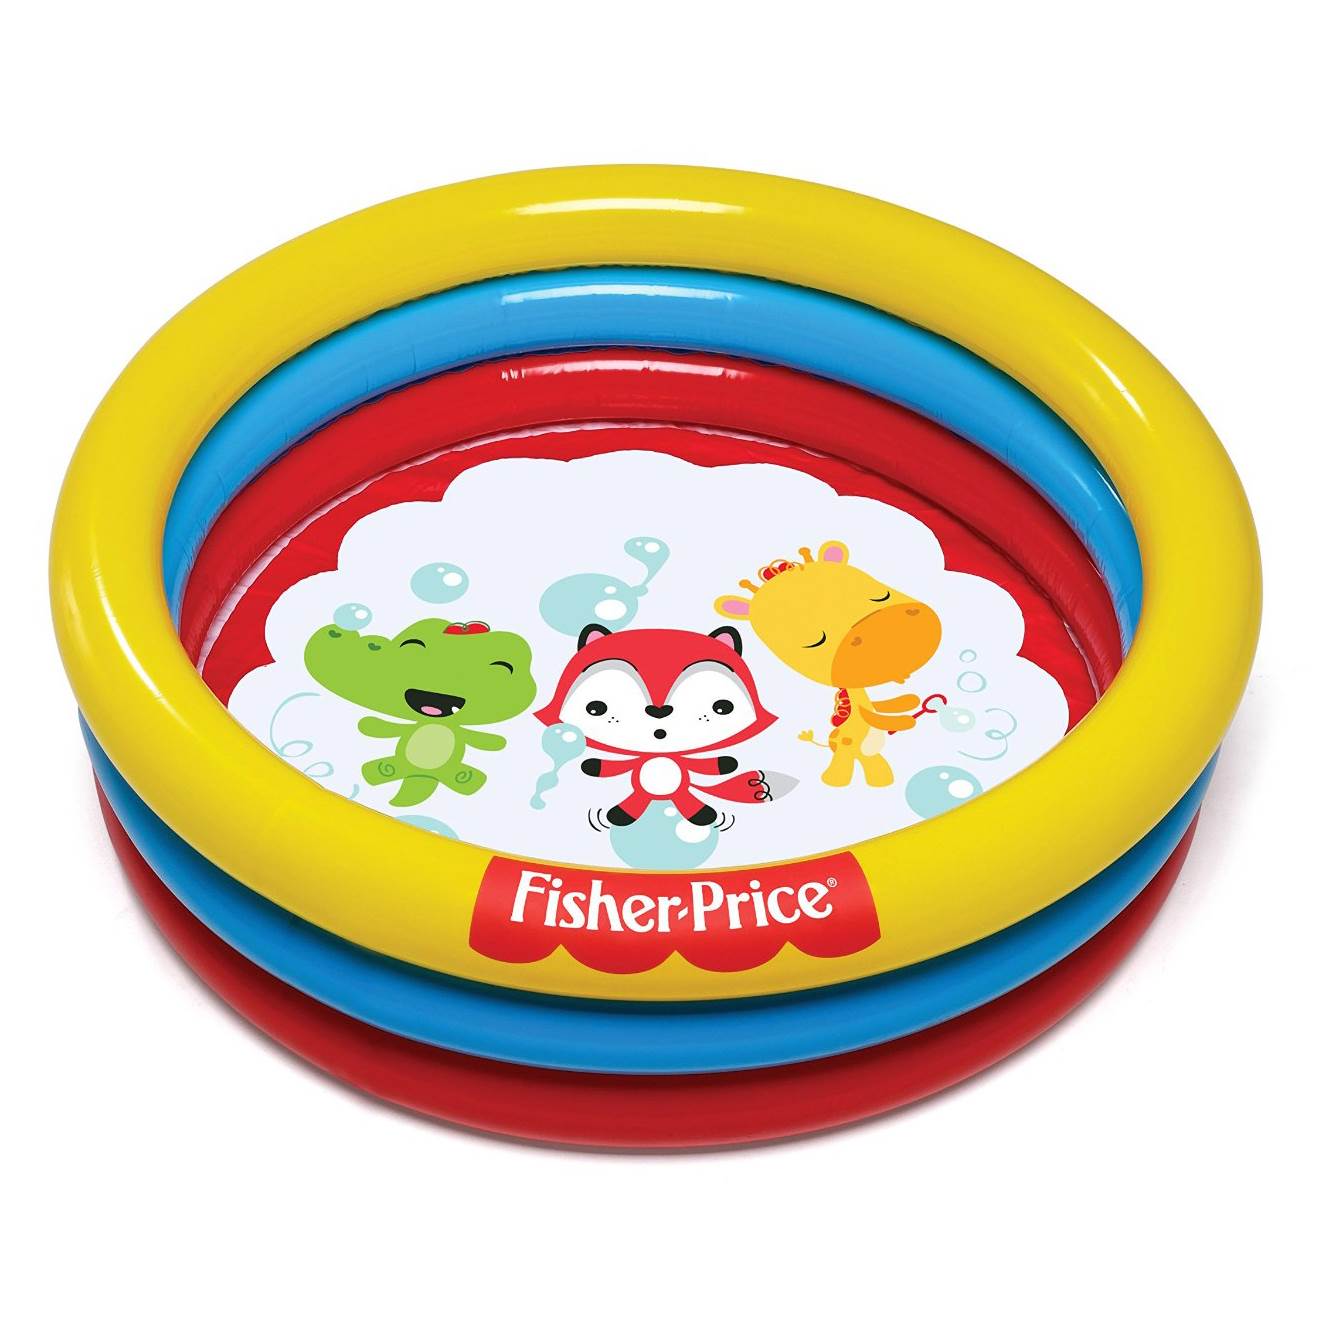 Fisher-Price 3 Ring Fun And Colorful Ball Pit Pool For Ages 2 And Up | 93501E-BW - image 2 of 5